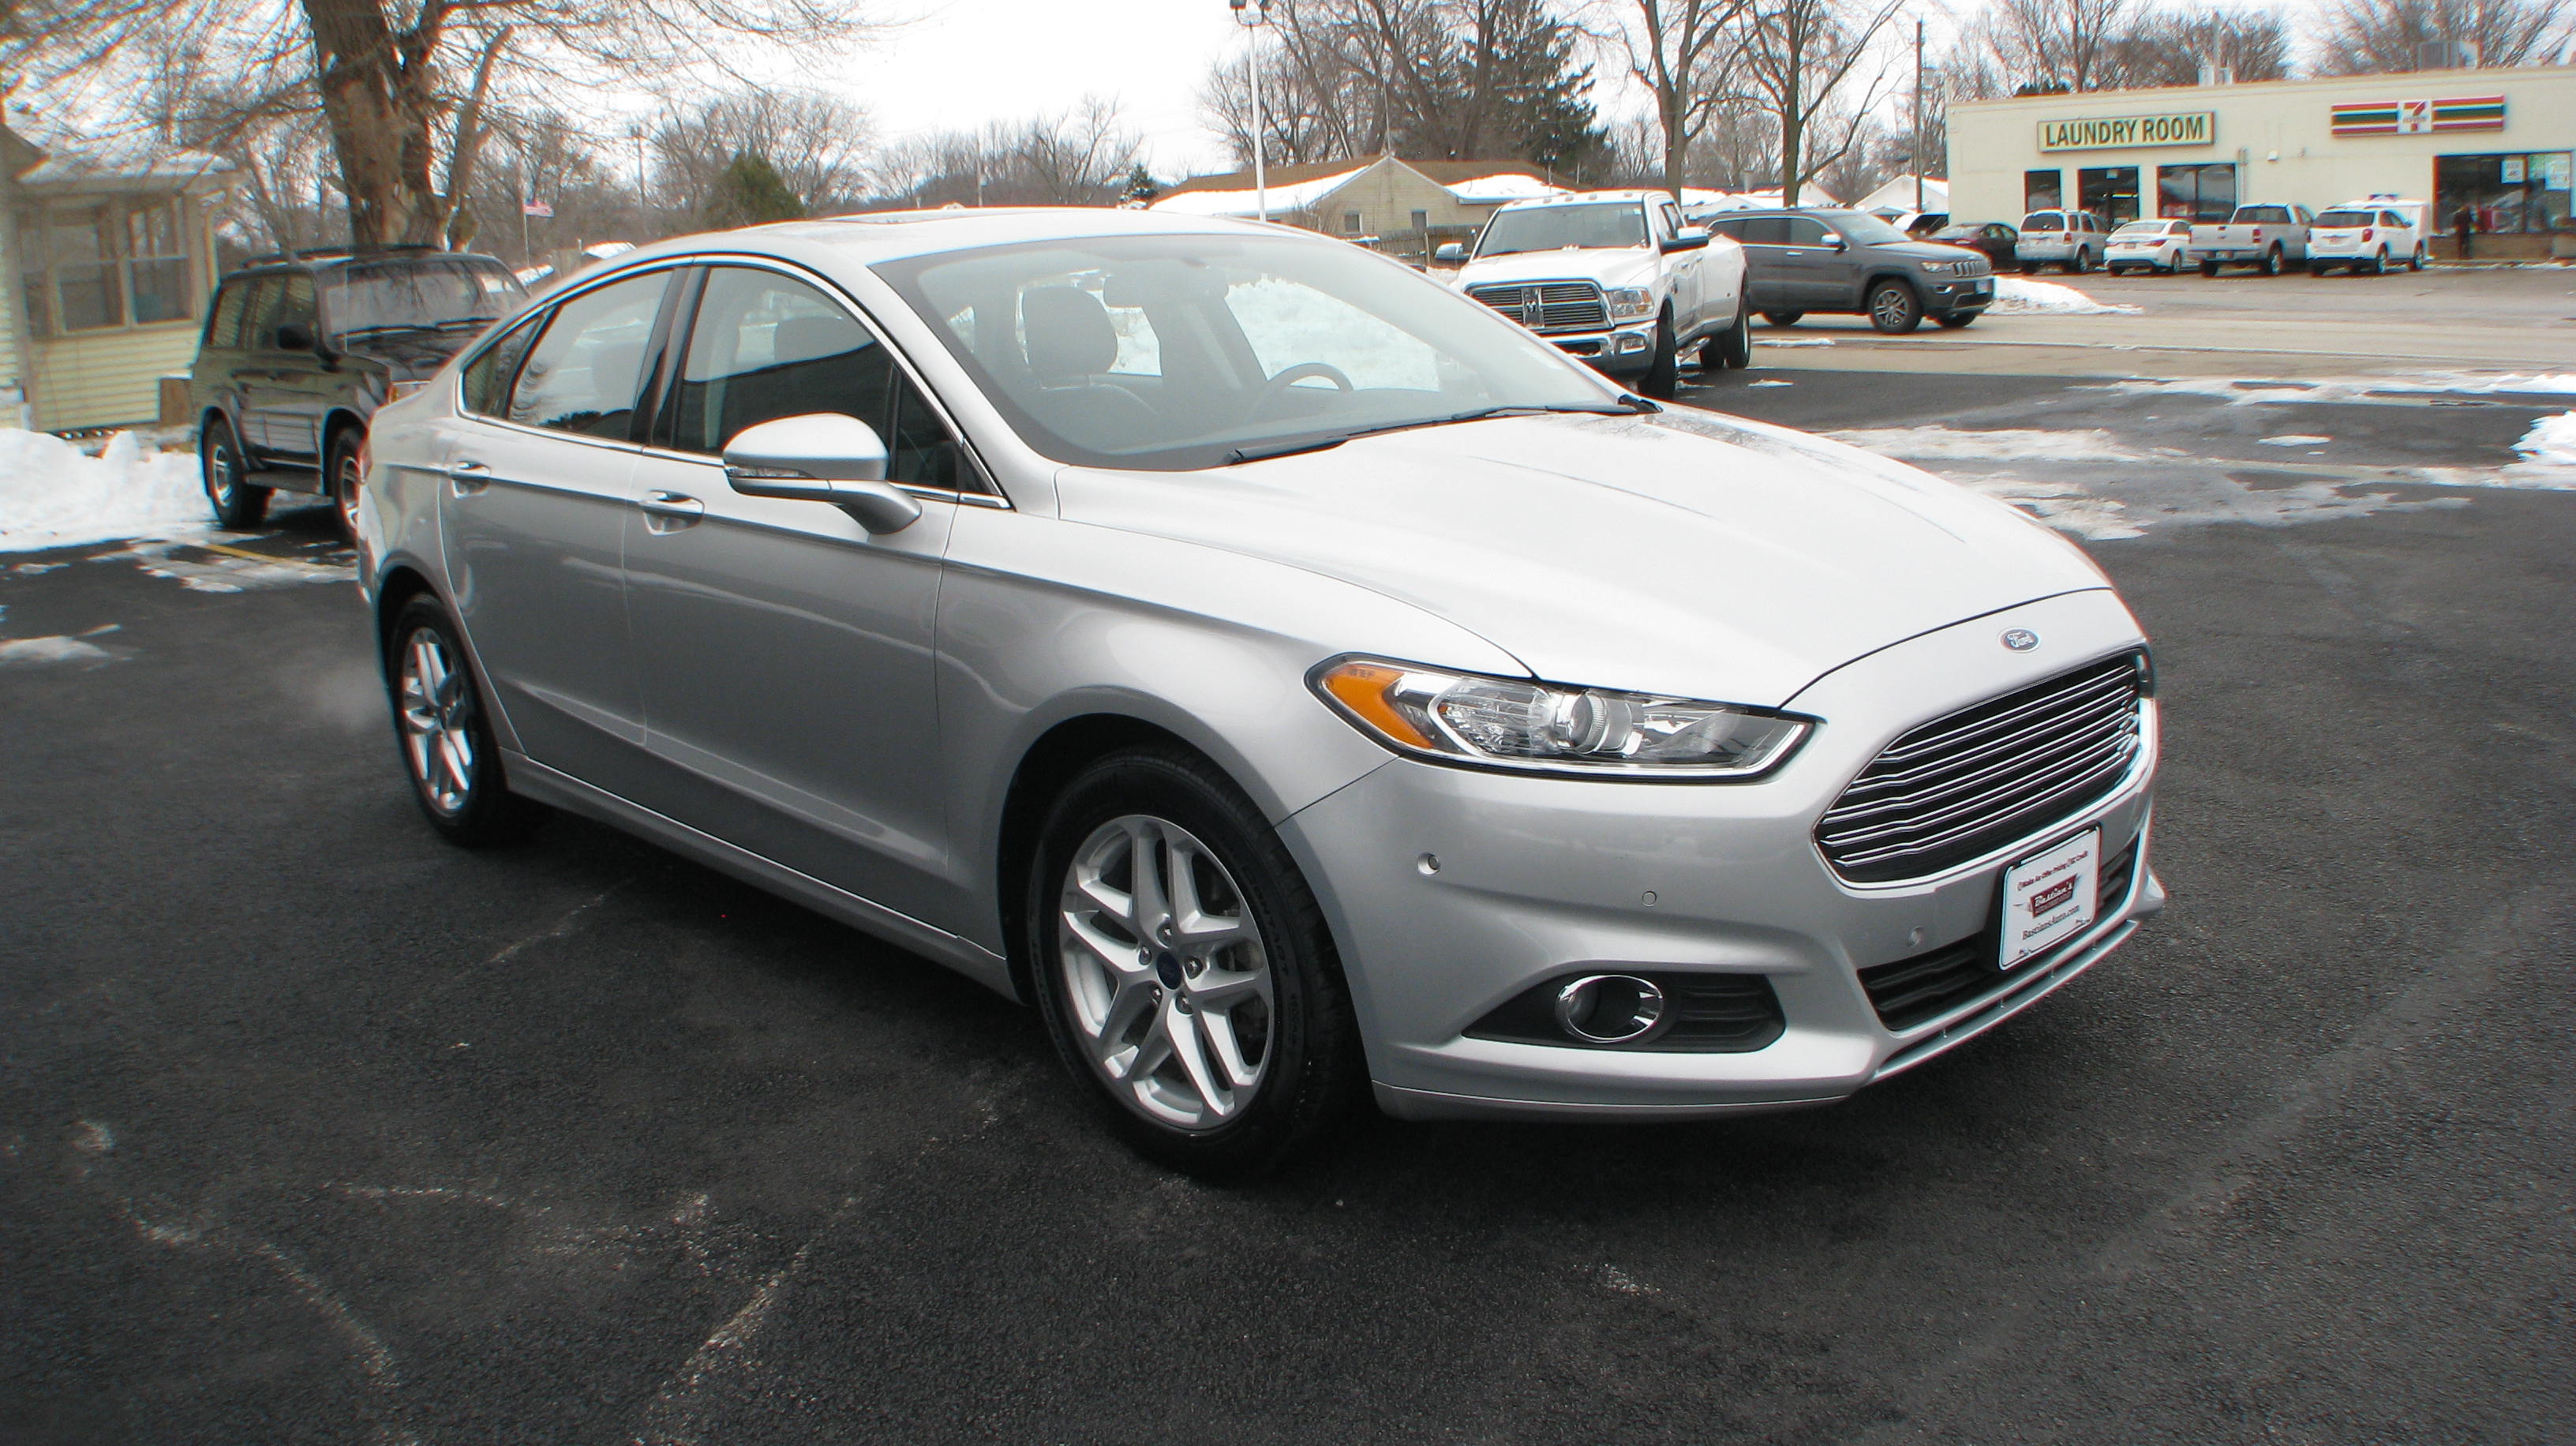 Pre-Owned 2013 Ford Fusion 4d Sedan SE 1.6L EcoBoost 4dr Car in Coal ...